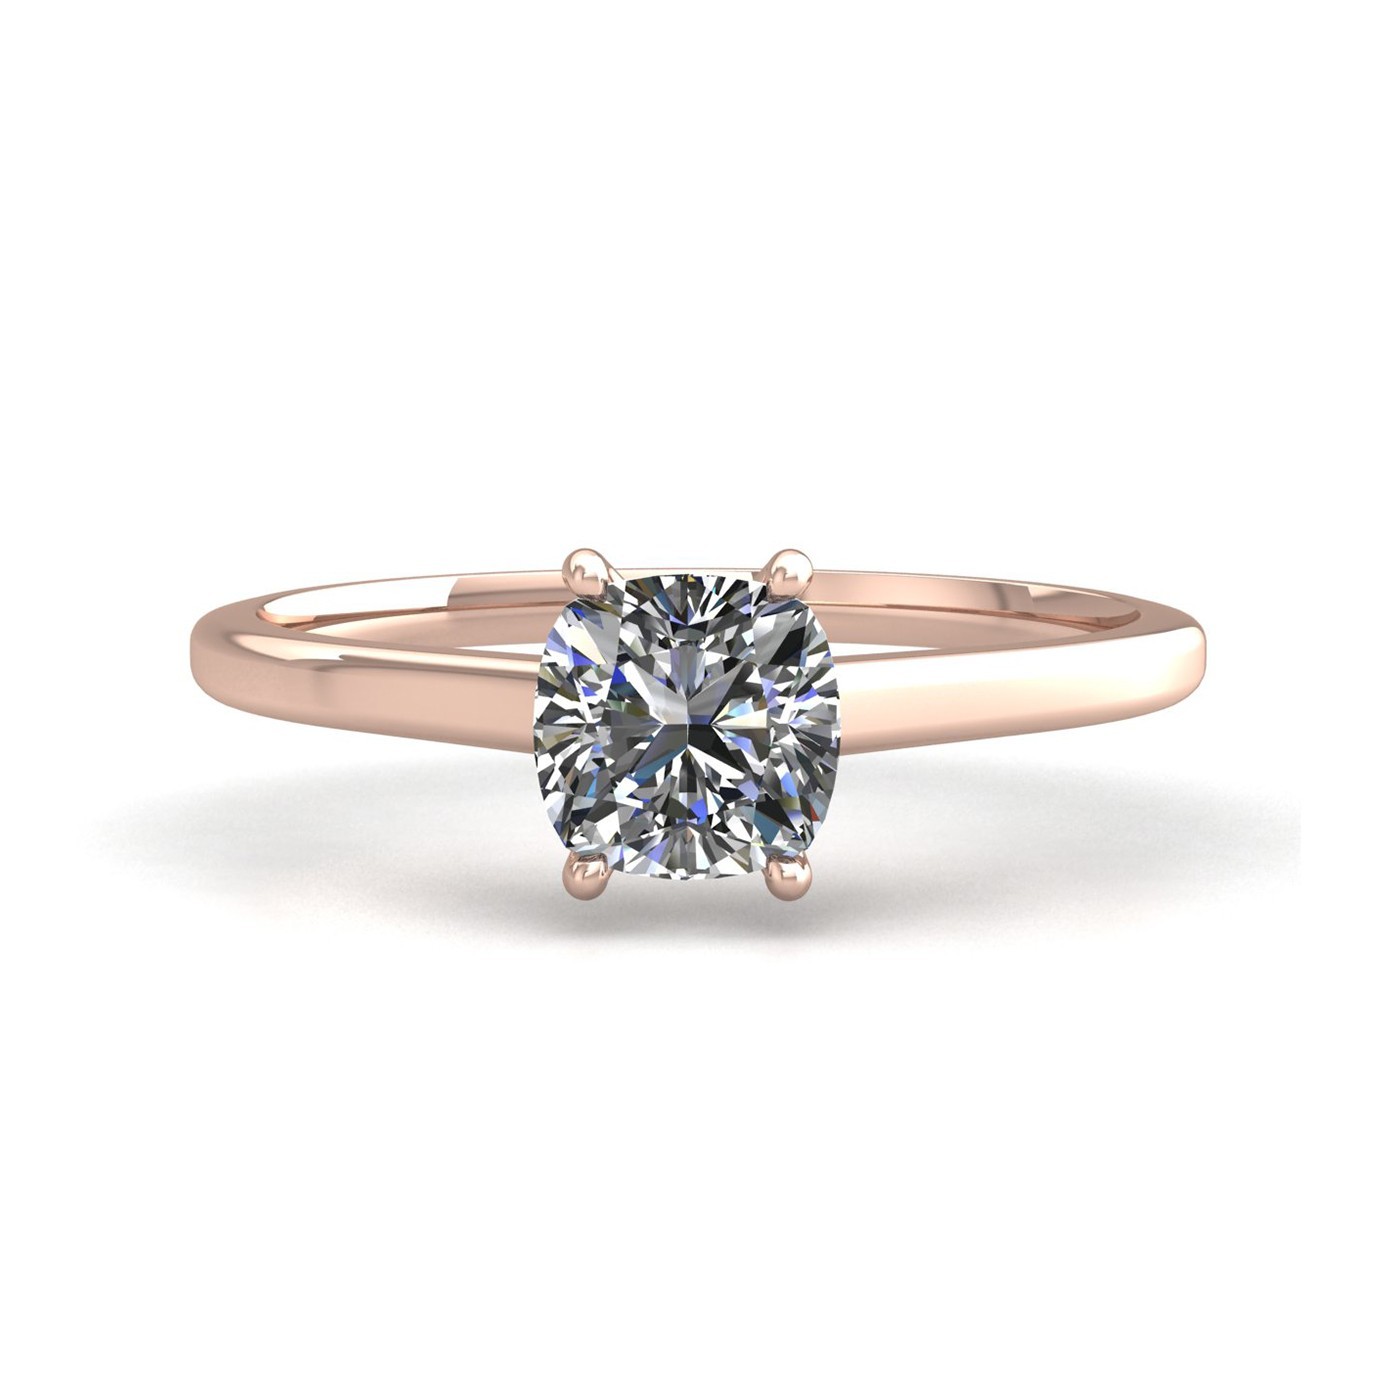 18k rose gold 2.5ct 4 prongs solitaire cushion cut diamond engagement ring with whisper thin band Photos & images